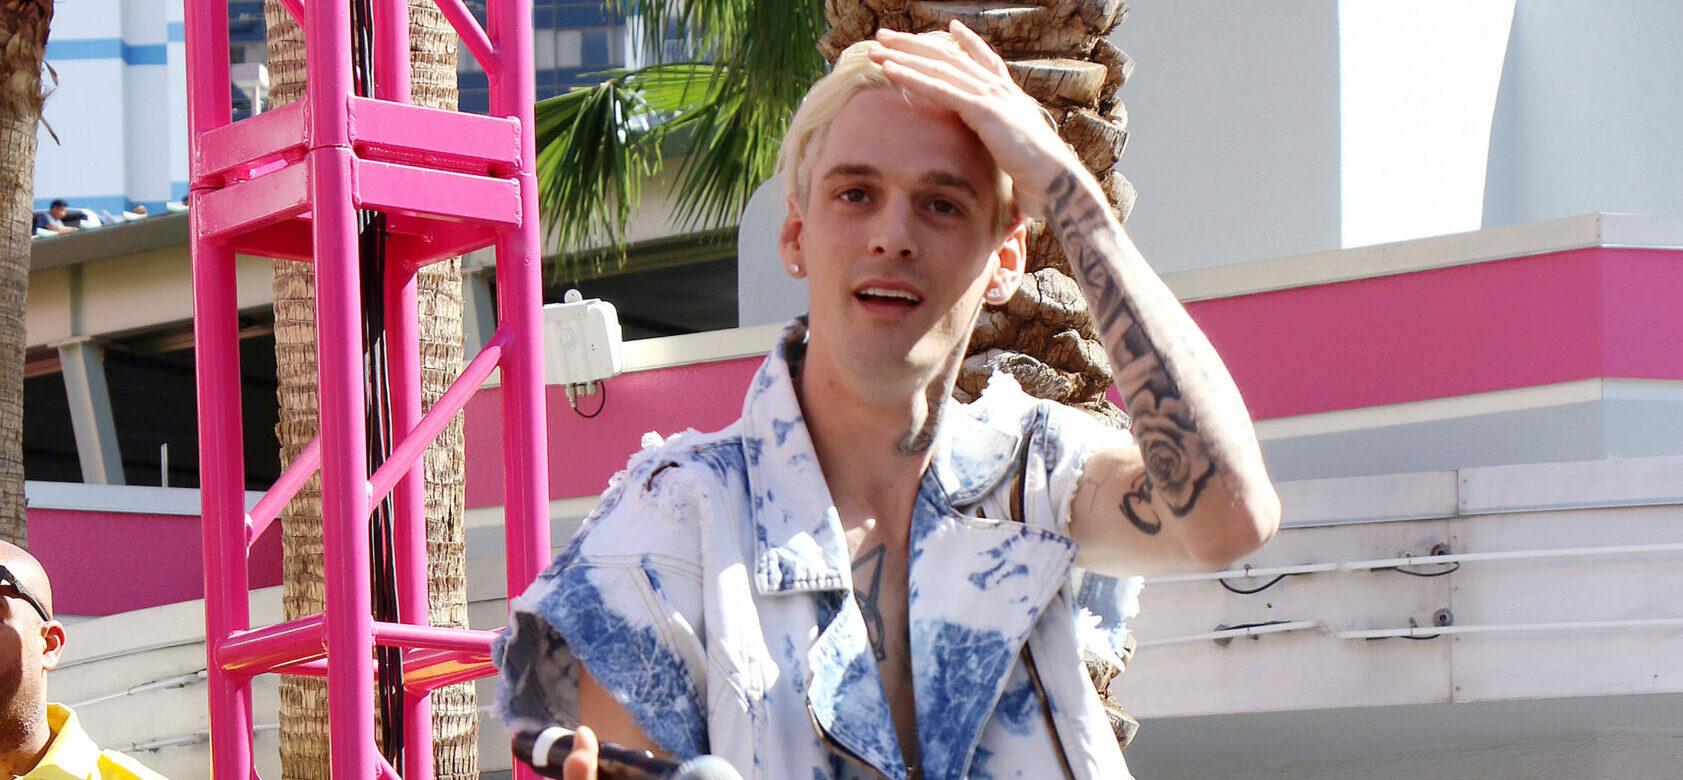 Aaron Carter’s Management Team Are ‘Trying To Grieve’ But Too Busy Putting Out Fires